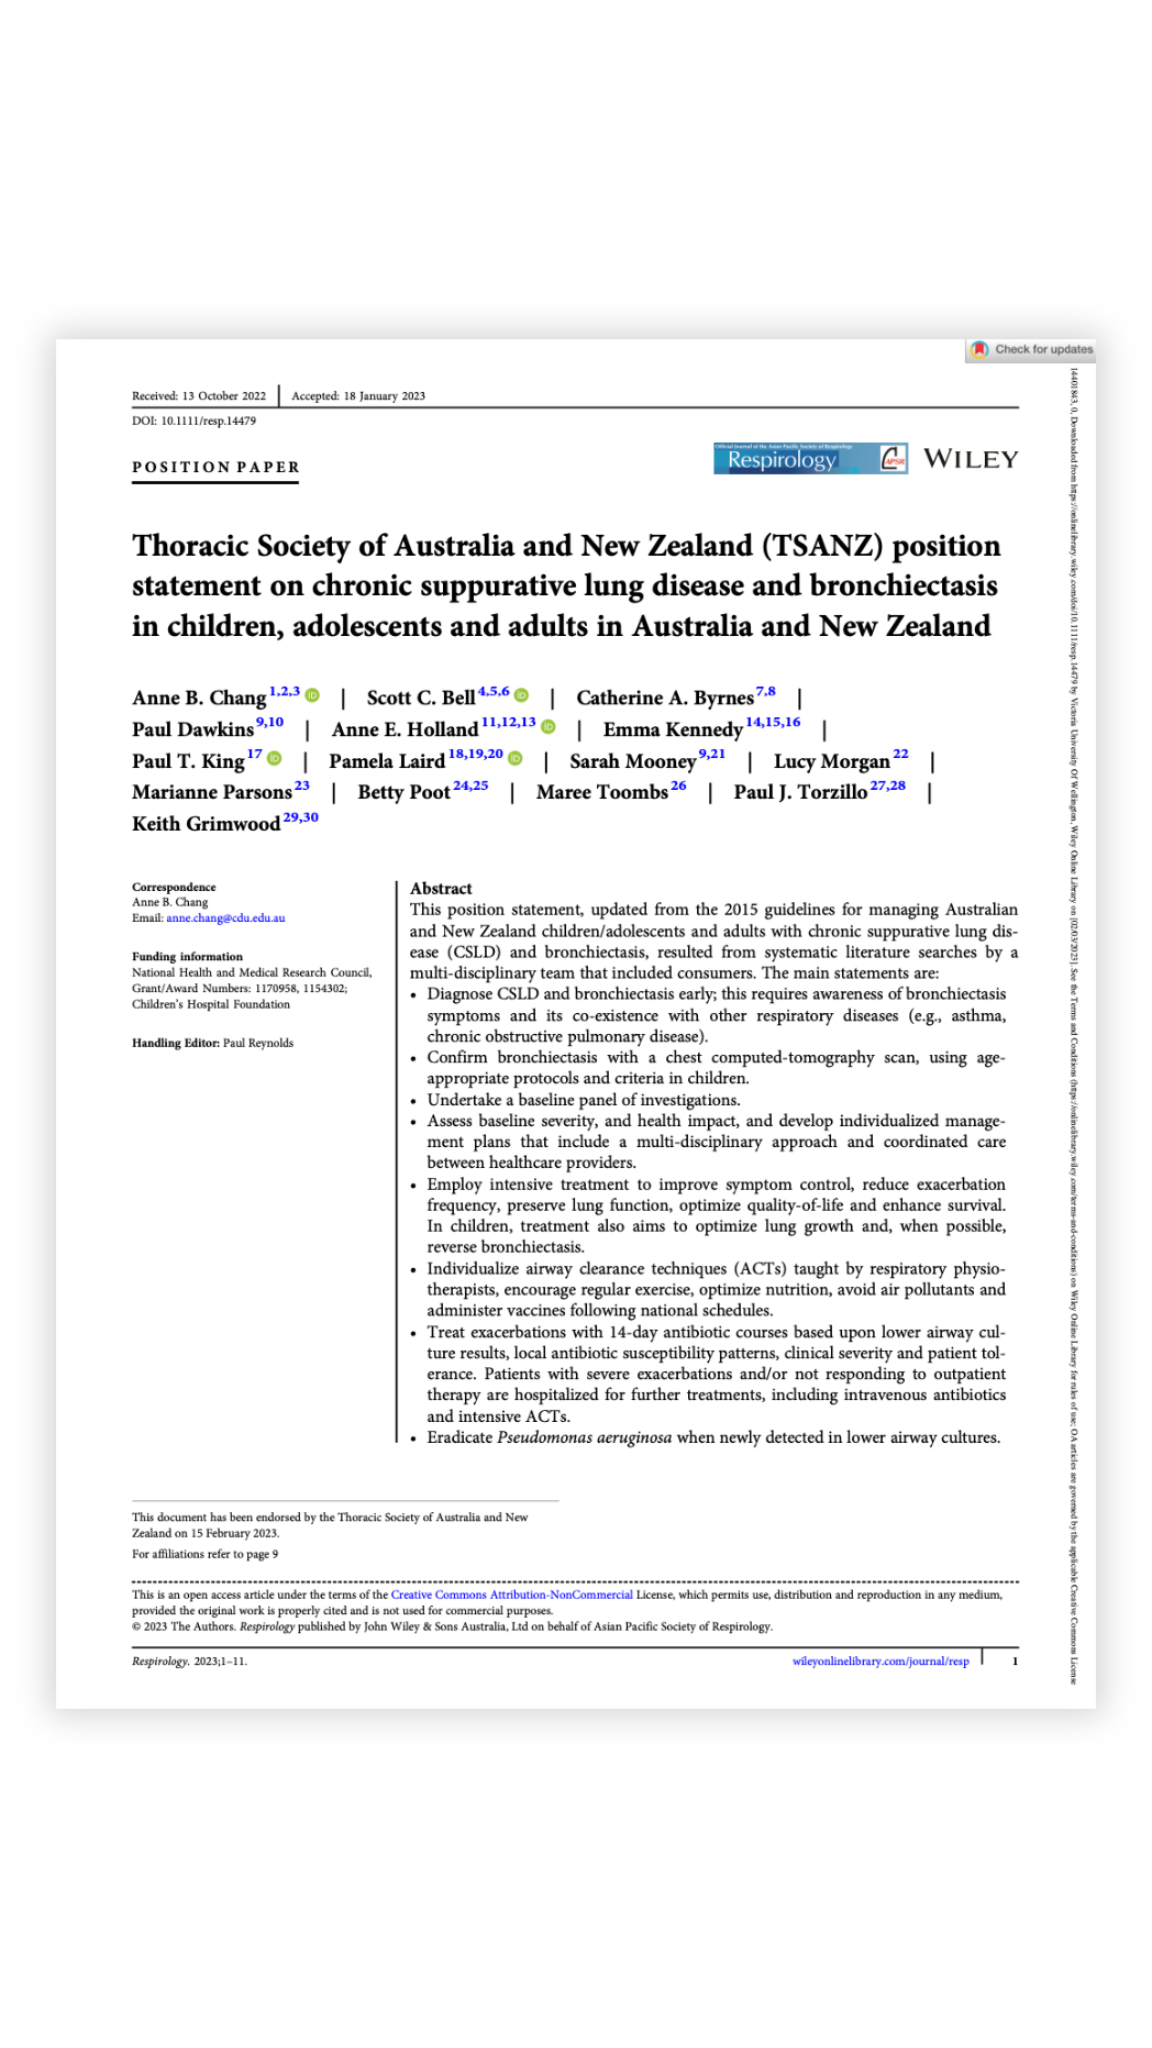 Thoracic Society of Australia and New Zealand (TSANZ) position statement on chronic suppurative lung disease and bronchiectasis in children, adolescents and adults in Australia and New Zealand